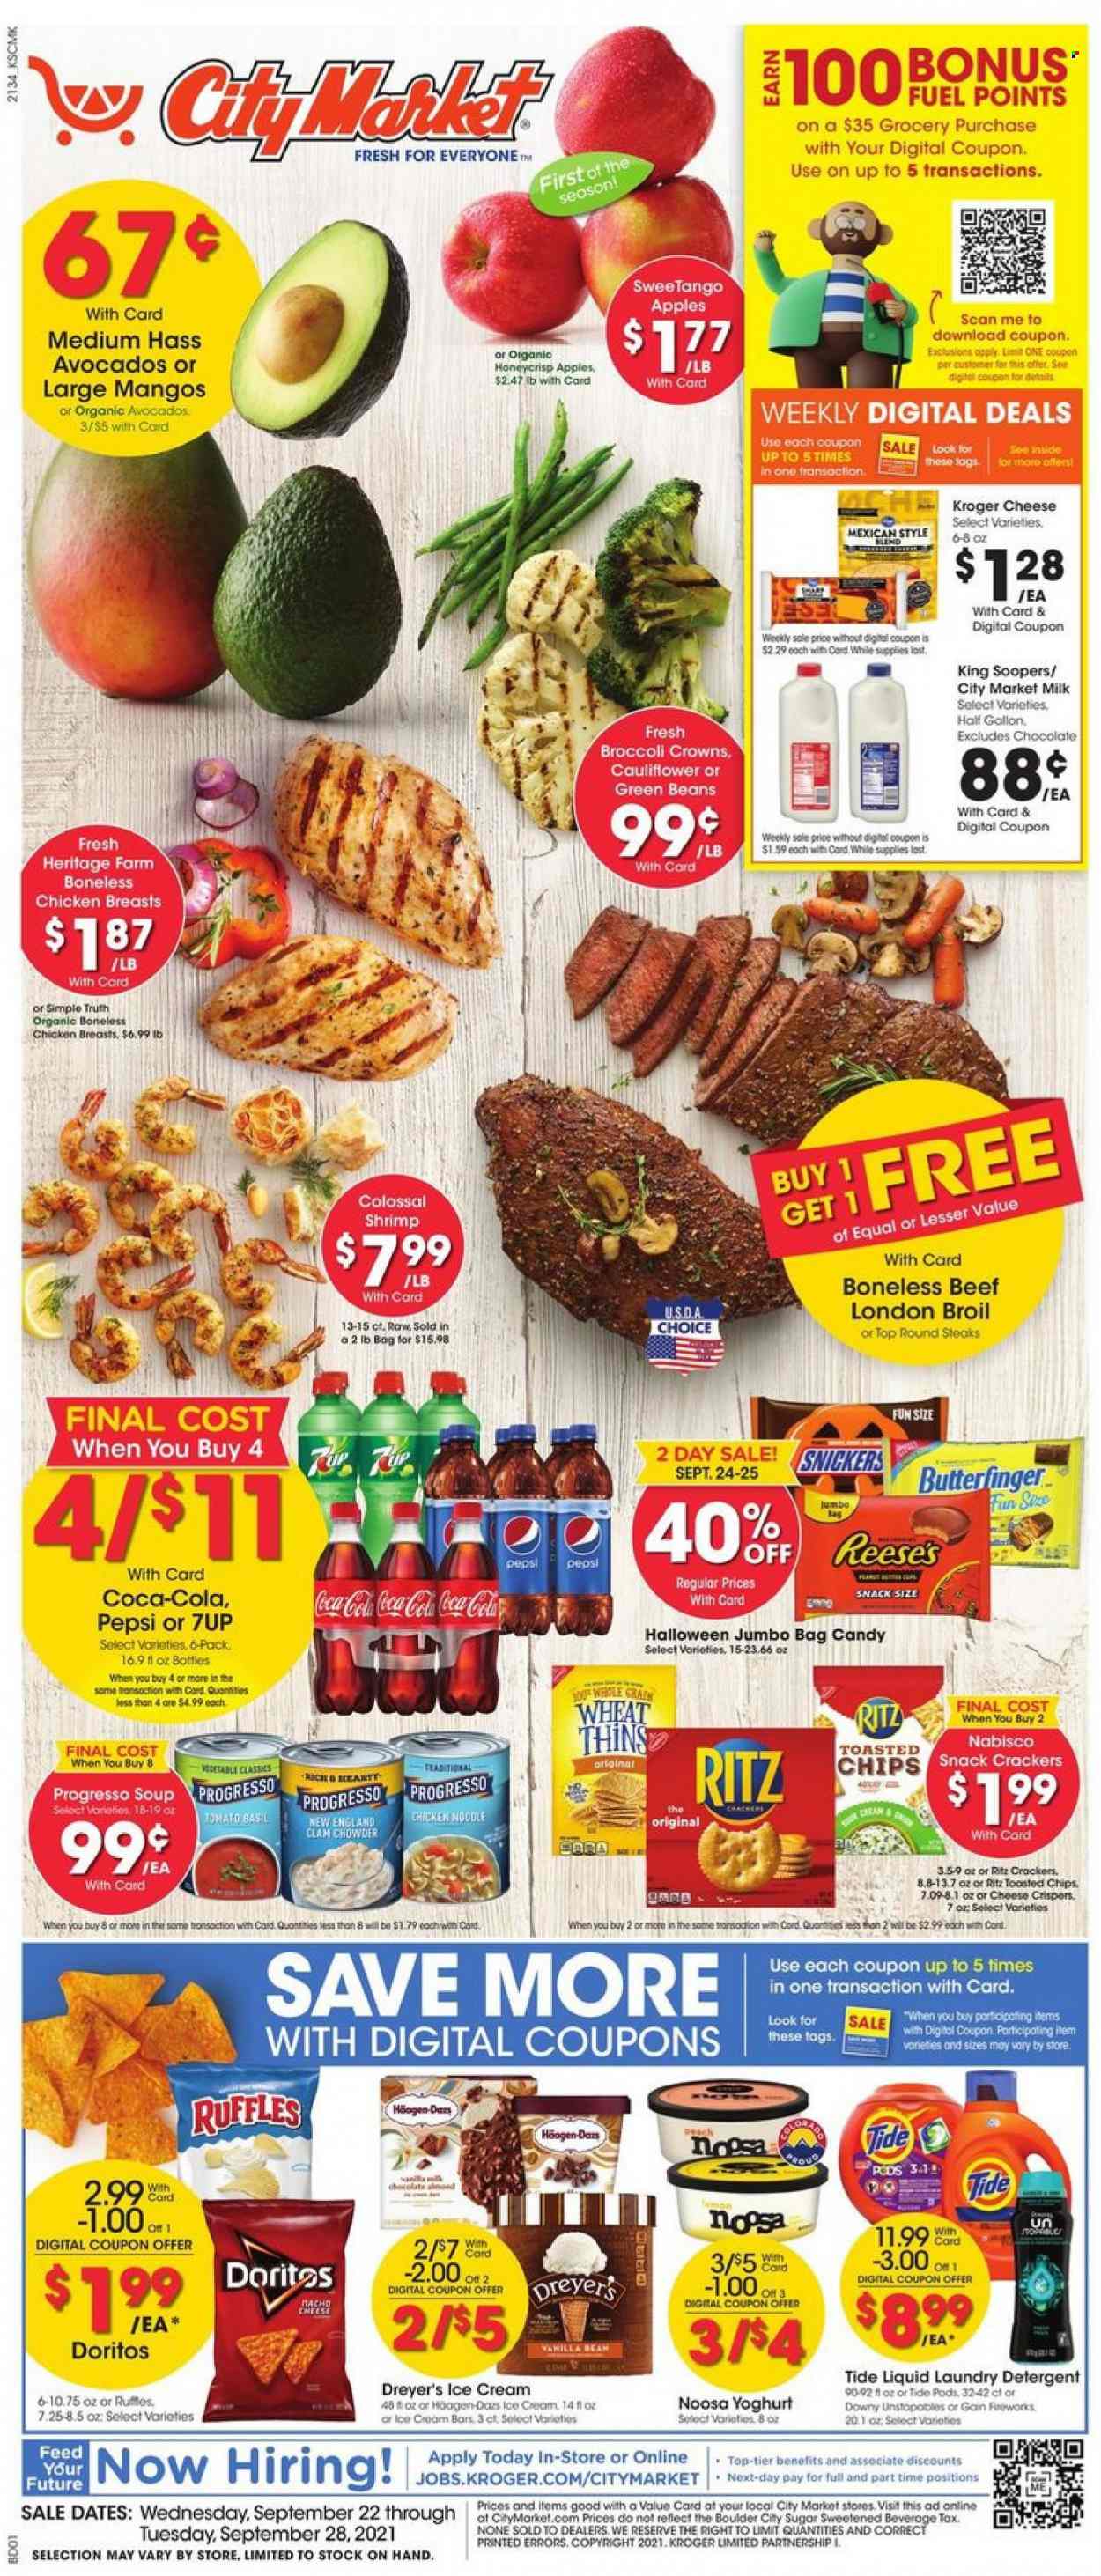 thumbnail - City Market Flyer - 09/22/2021 - 09/28/2021 - Sales products - beans, green beans, avocado, shrimps, Progresso, yoghurt, milk, ice cream, ice cream bars, Reese's, Häagen-Dazs, snack, Snickers, crackers, RITZ, Doritos, chips, Thins, Ruffles, sugar, clam chowder, esponja, Coca-Cola, Pepsi, 7UP, chicken breasts, steak, detergent, Gain, Tide, Unstopables, laundry detergent. Page 1.